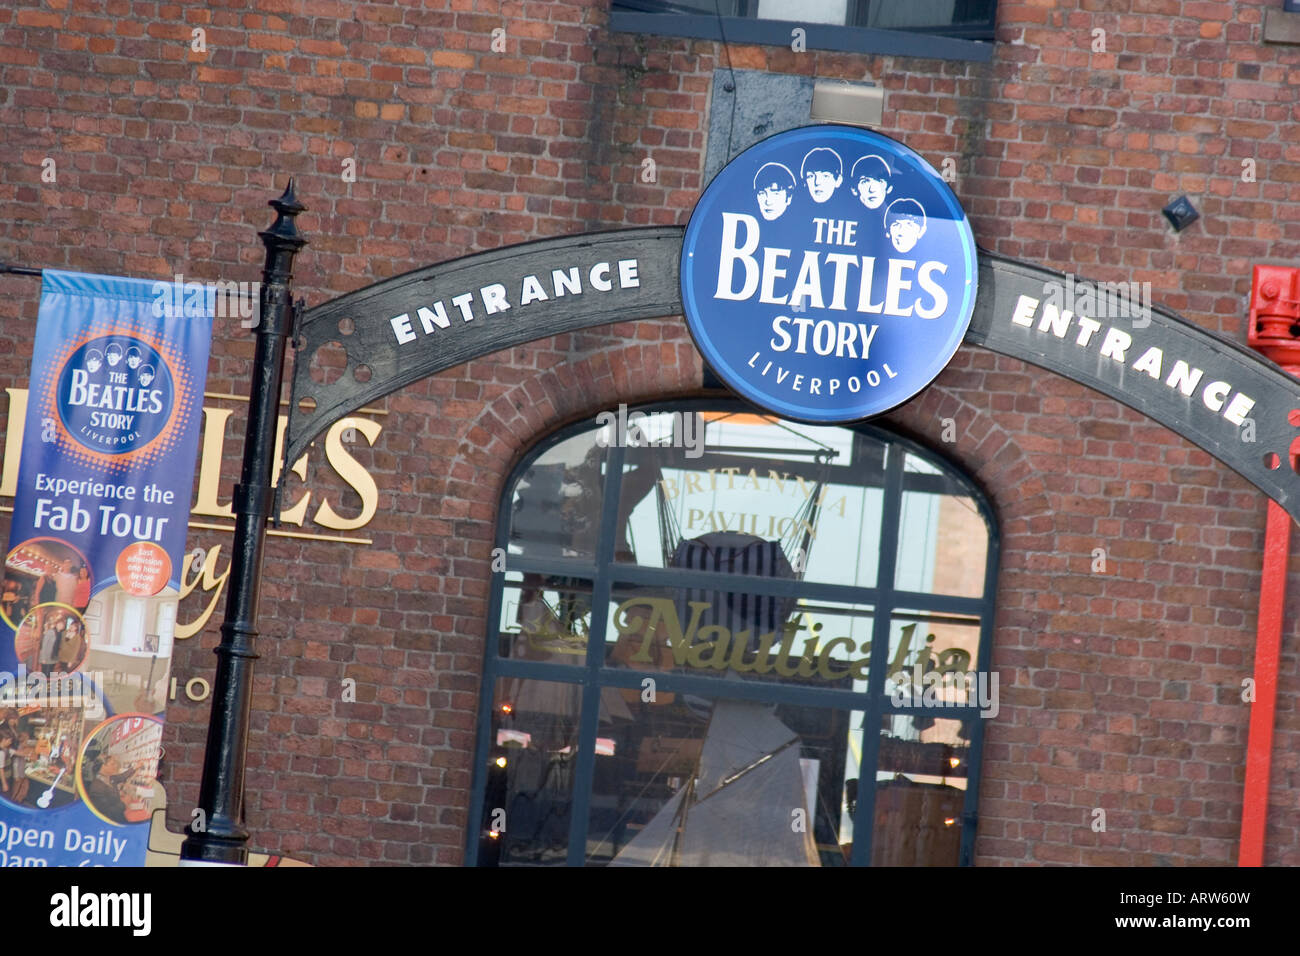 The Beatles Story Exhibition in Liverpool England Stock Photo